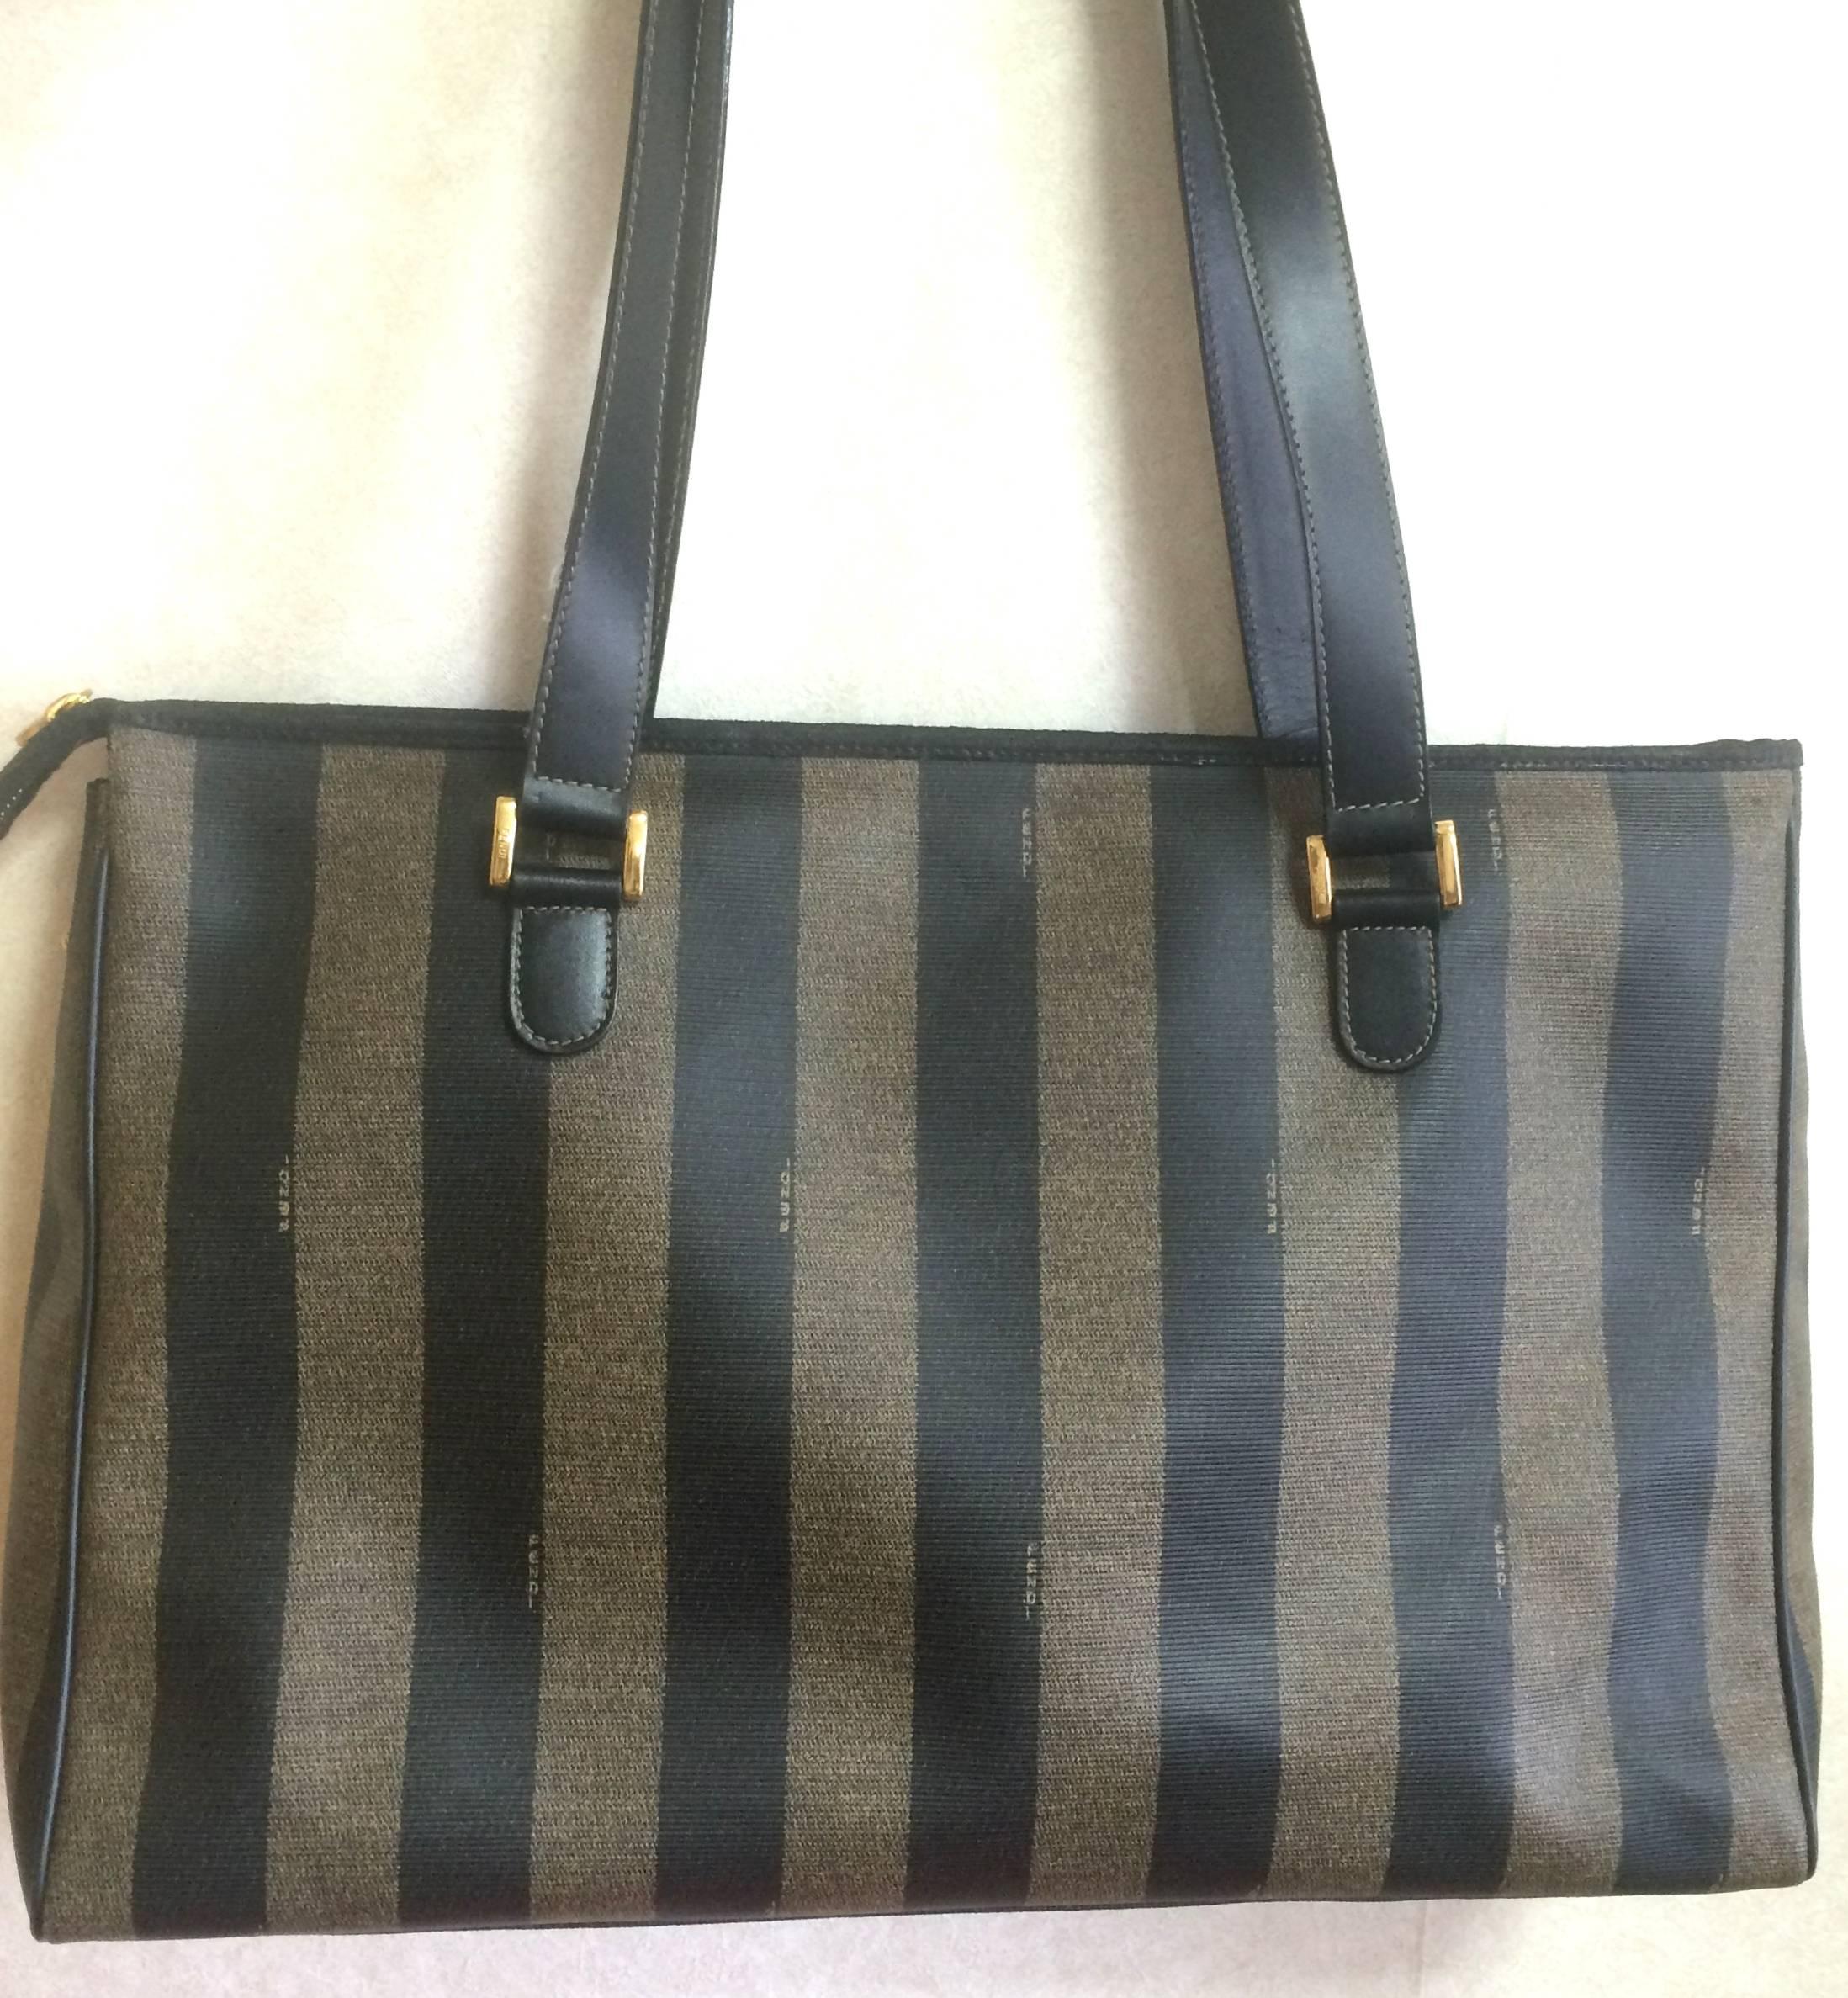 1990s. Vintage FENDI classic pecan stripe pattern large shopper tote bag with black leather handles. Daily use purse for Unisex

For all Fendi vintage lovers, this purse is the one for you!

Very chic and cute shopper tote from FENDI back in the